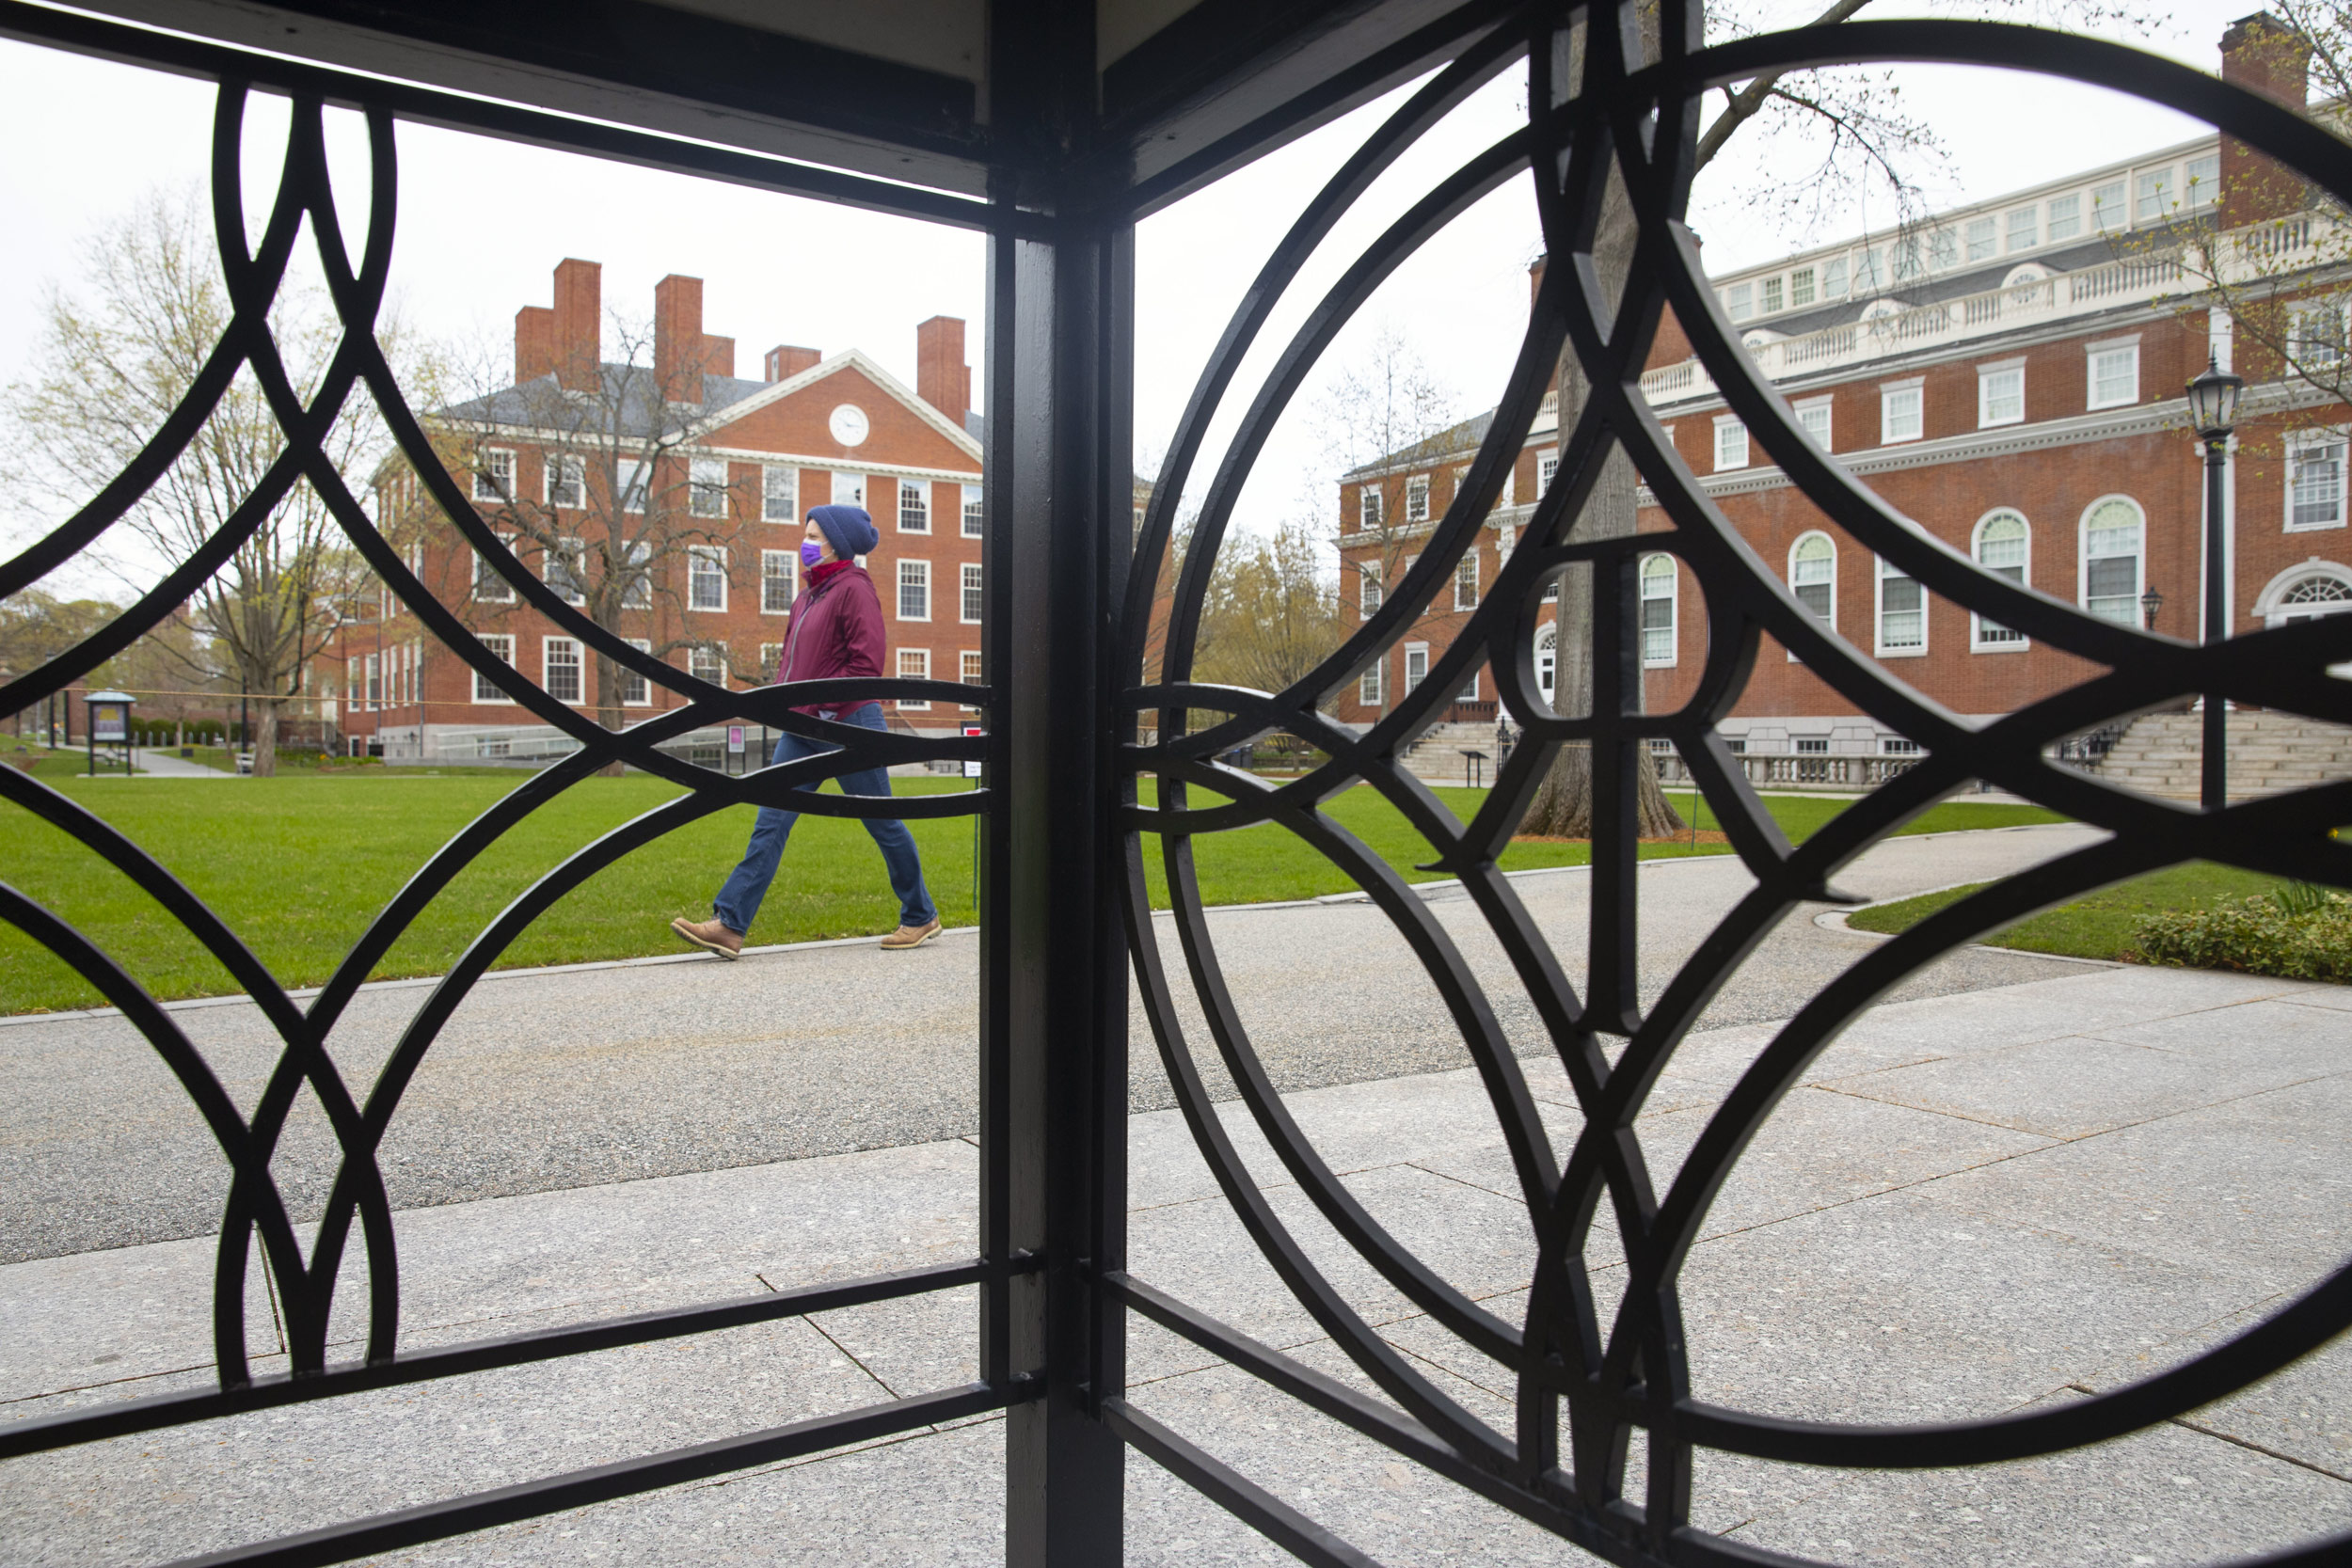 A woman's gait is framed by the iron logo of Radcliffe Institute.